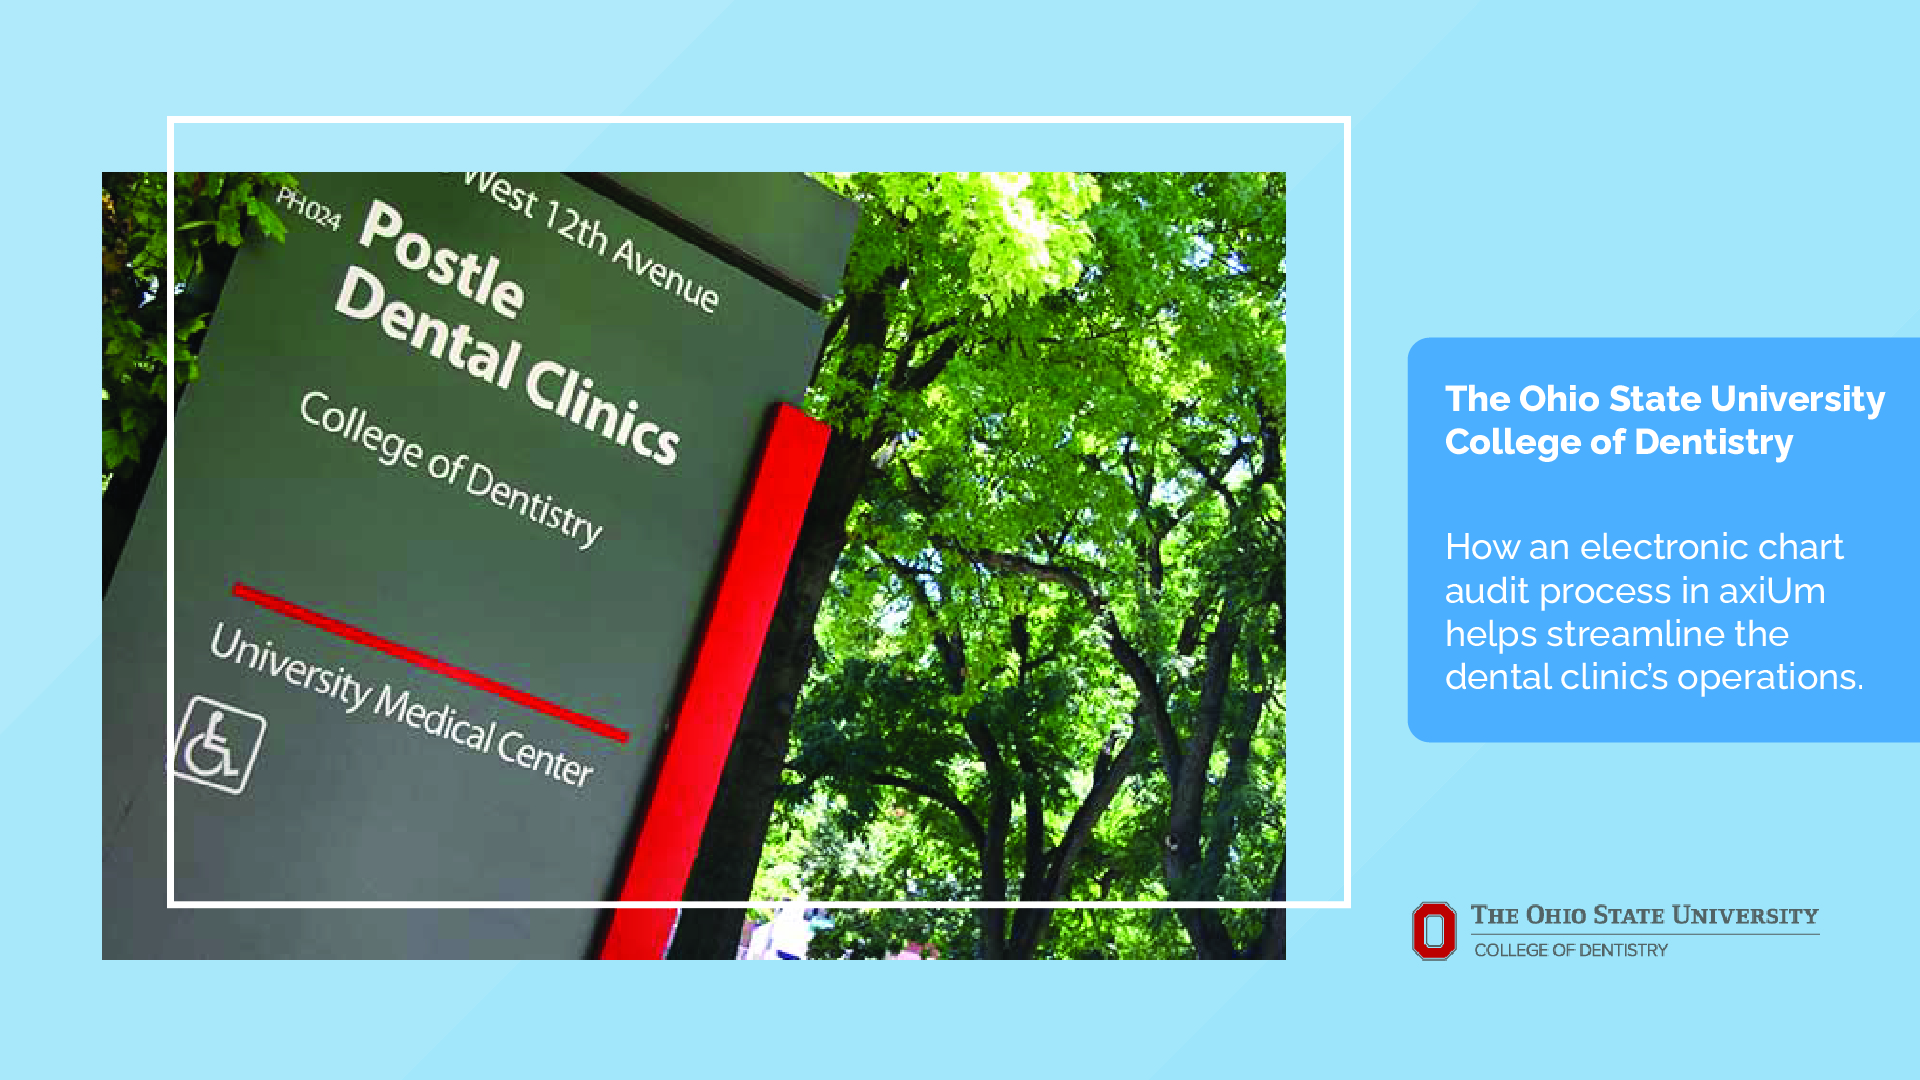 Ohio State University, College of Dentistry: How an electronic chart audit process in axiUm helps streamline the dental clinic’s operations.